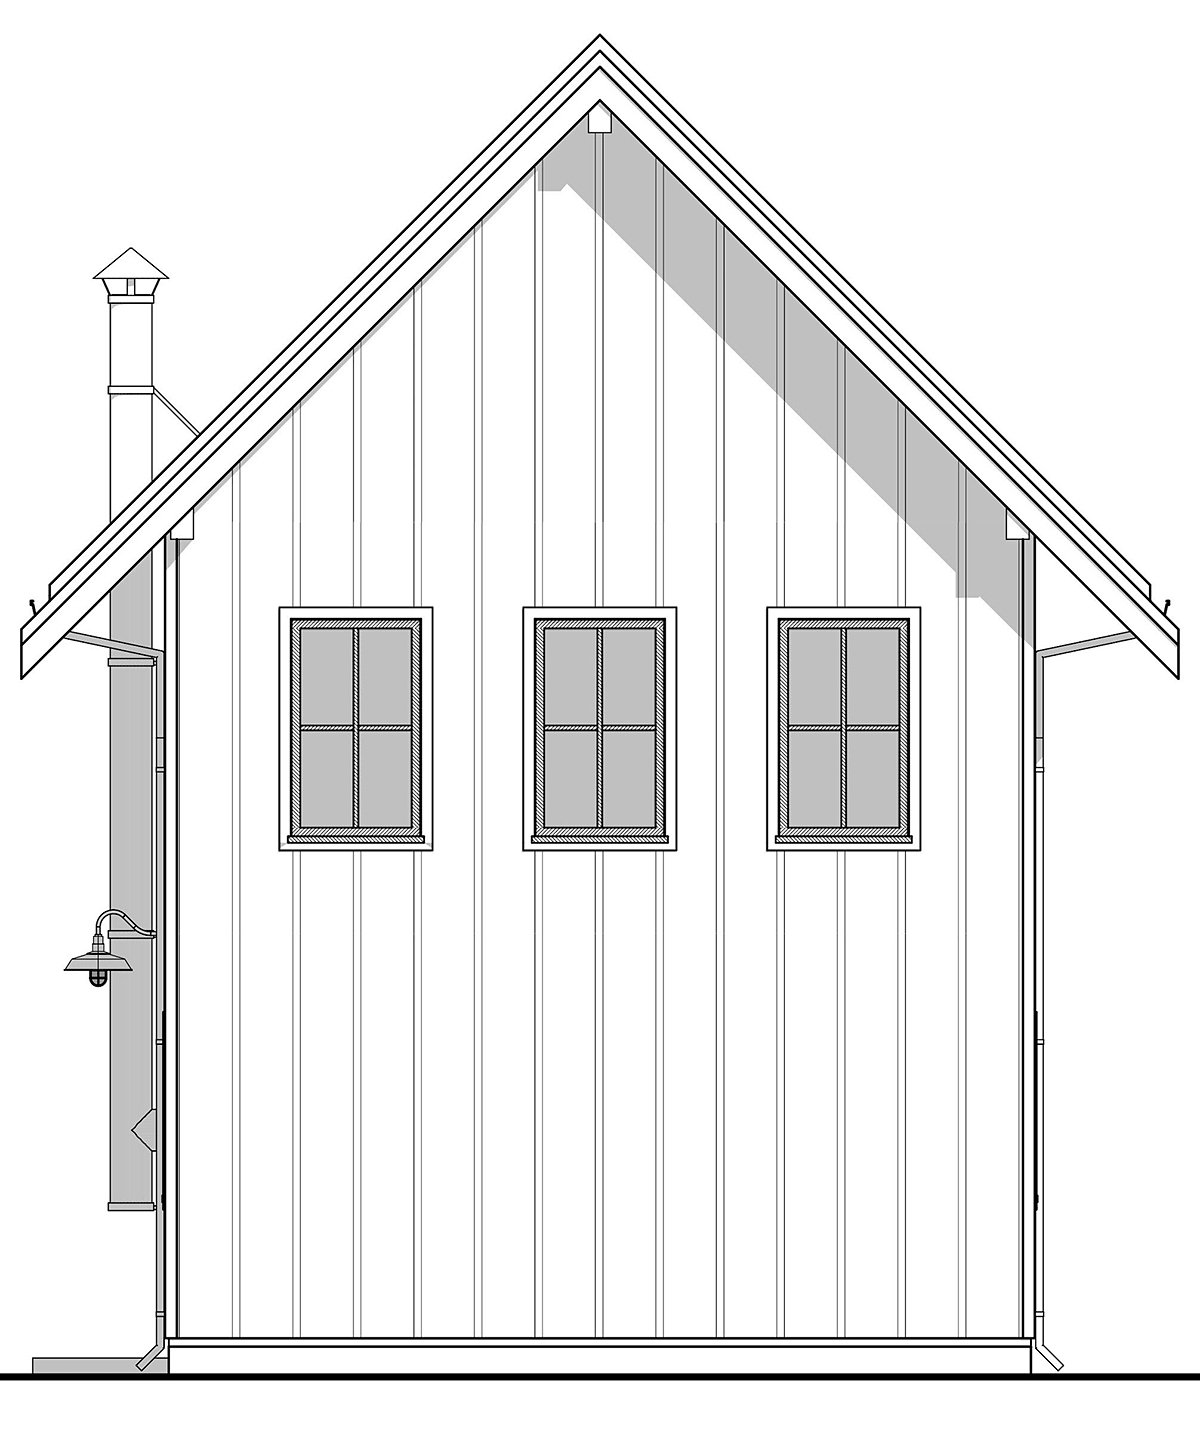 Farmhouse, Traditional Plan with 893 Sq. Ft., 2 Bedrooms, 2 Bathrooms Rear Elevation